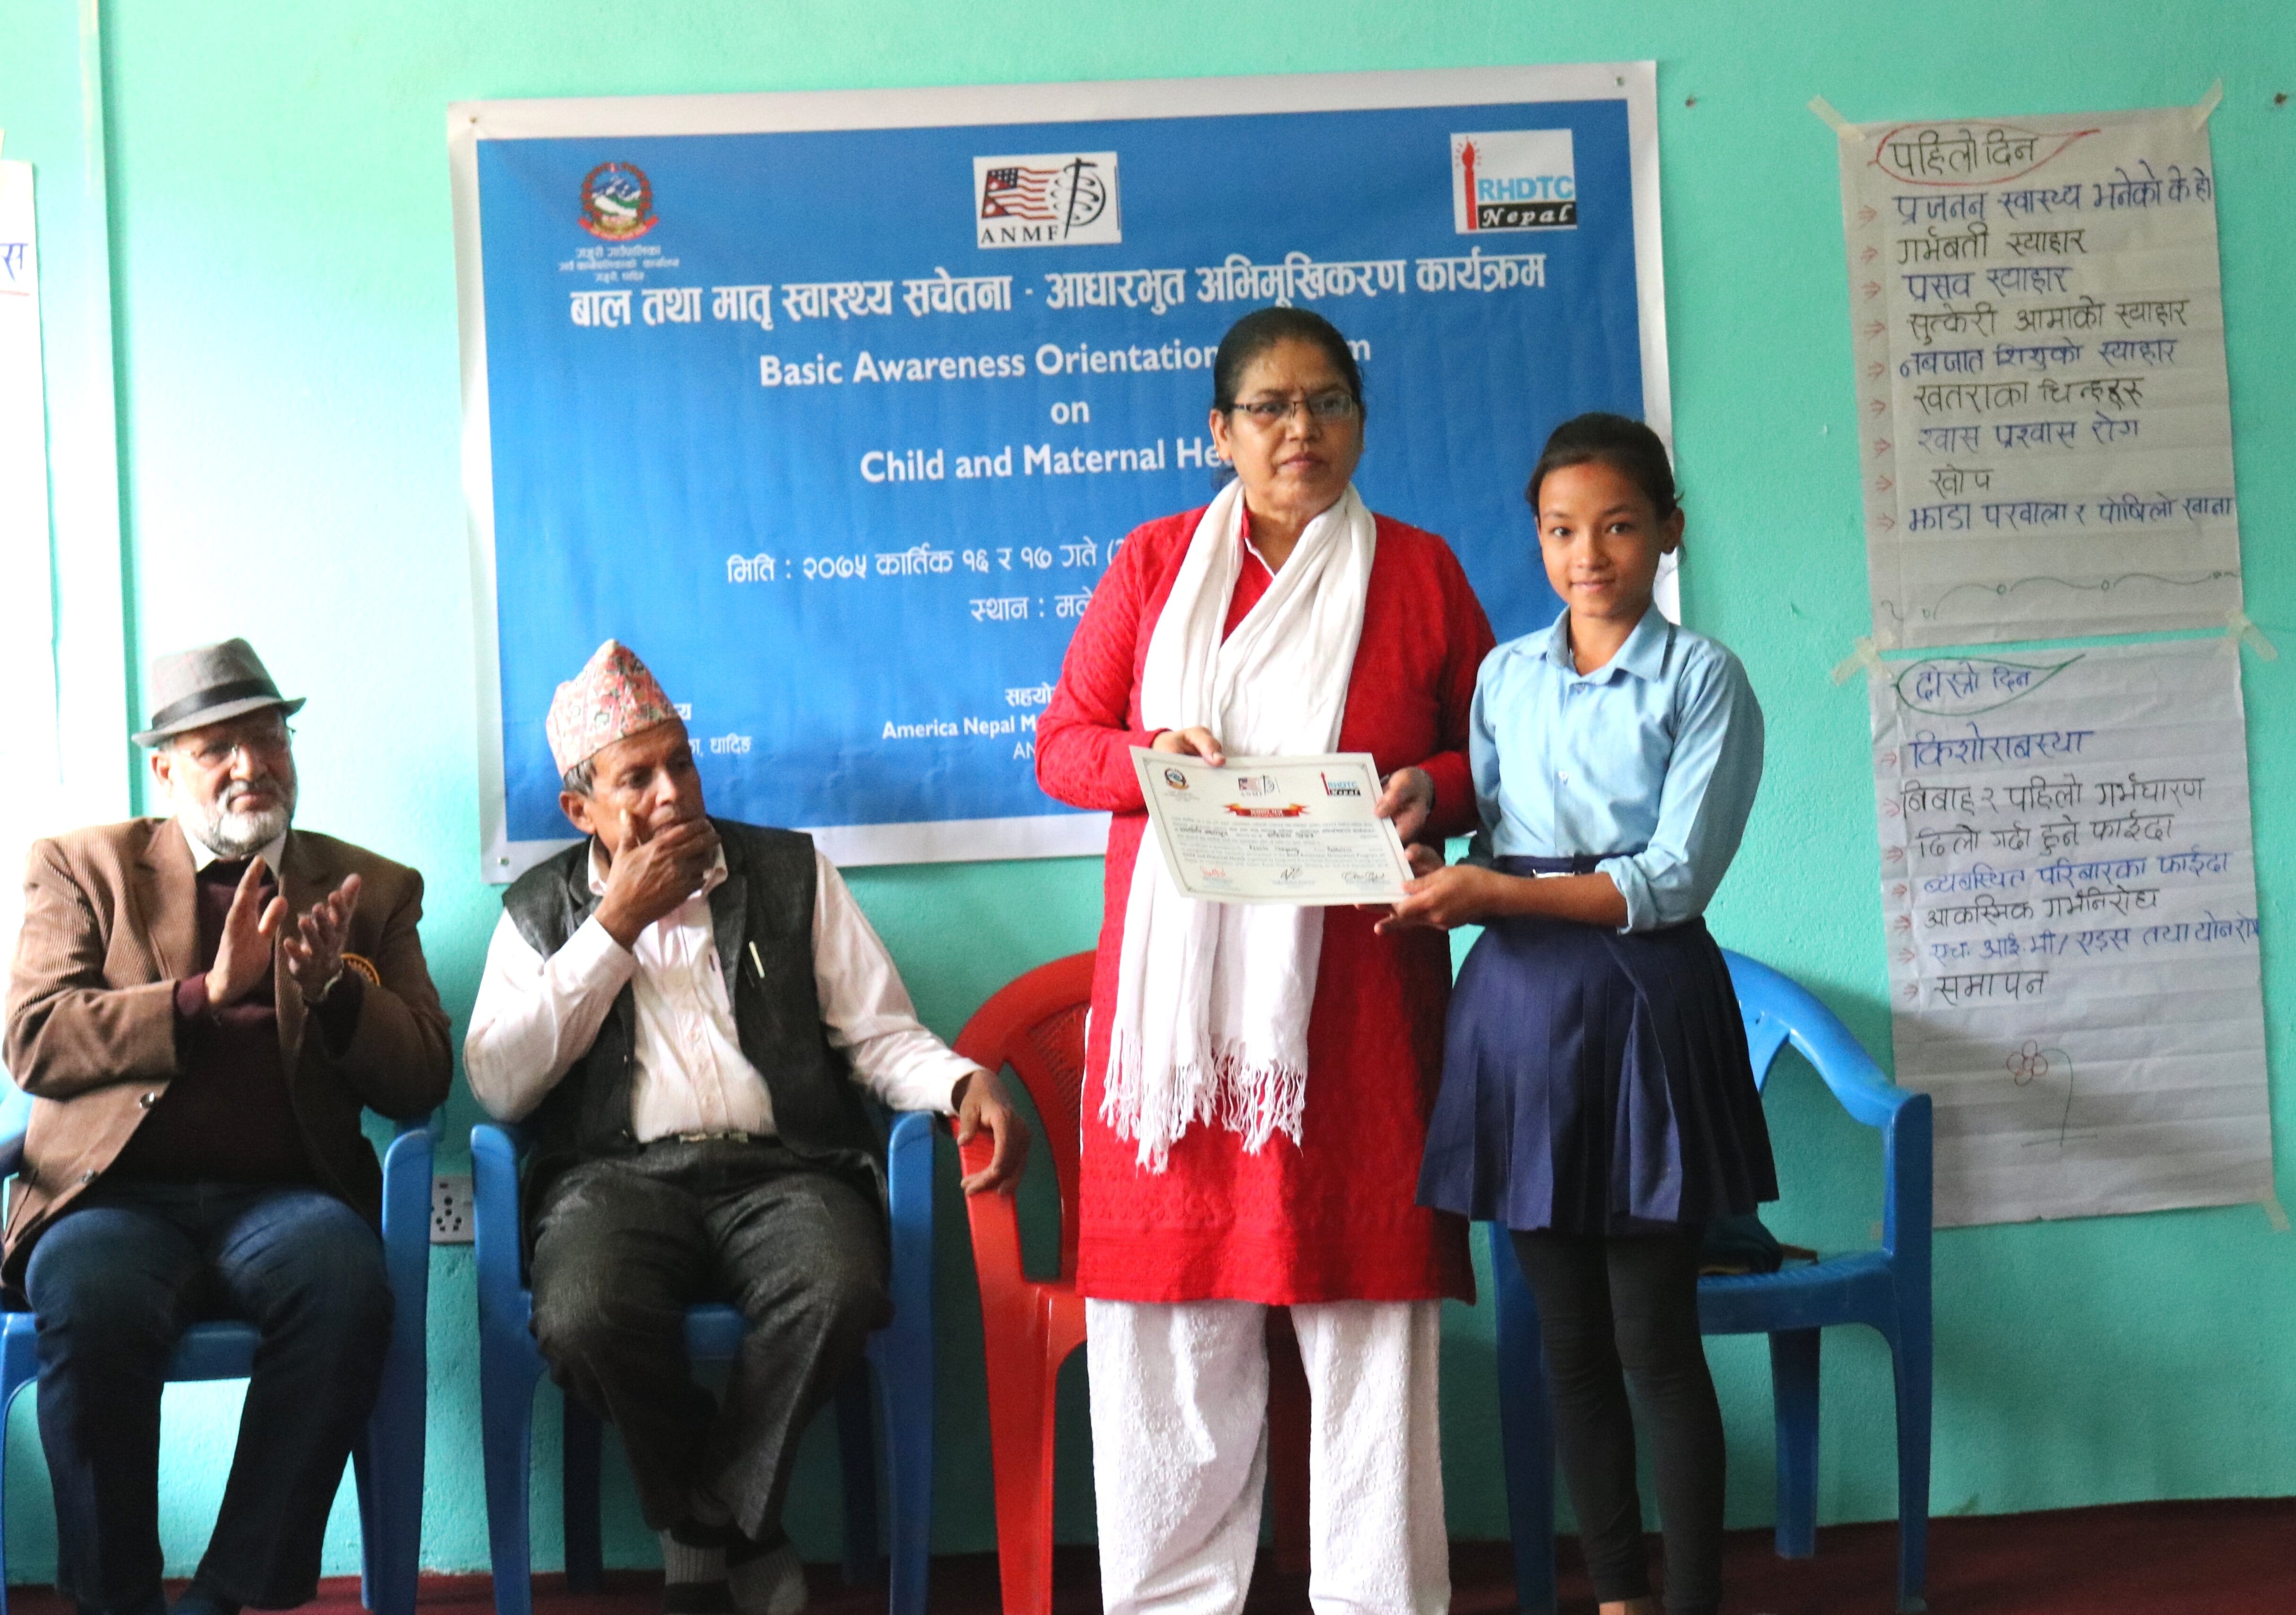 Community level orientation on child and maternal health to adolescent girls from Rural Nepal